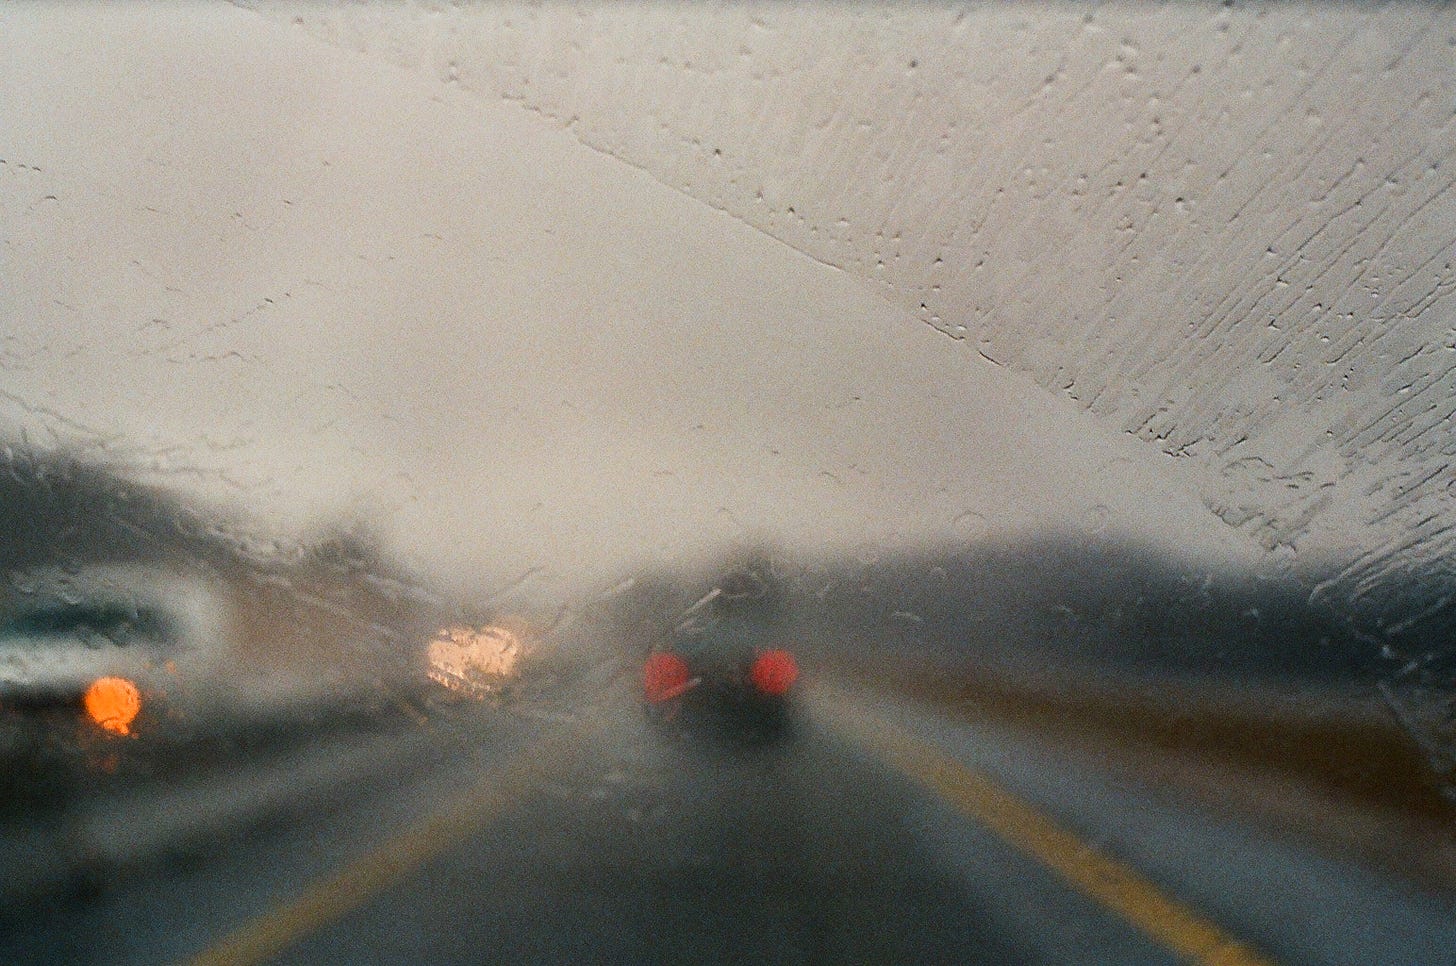 Blurred car taillights through a rain soaked windshield.